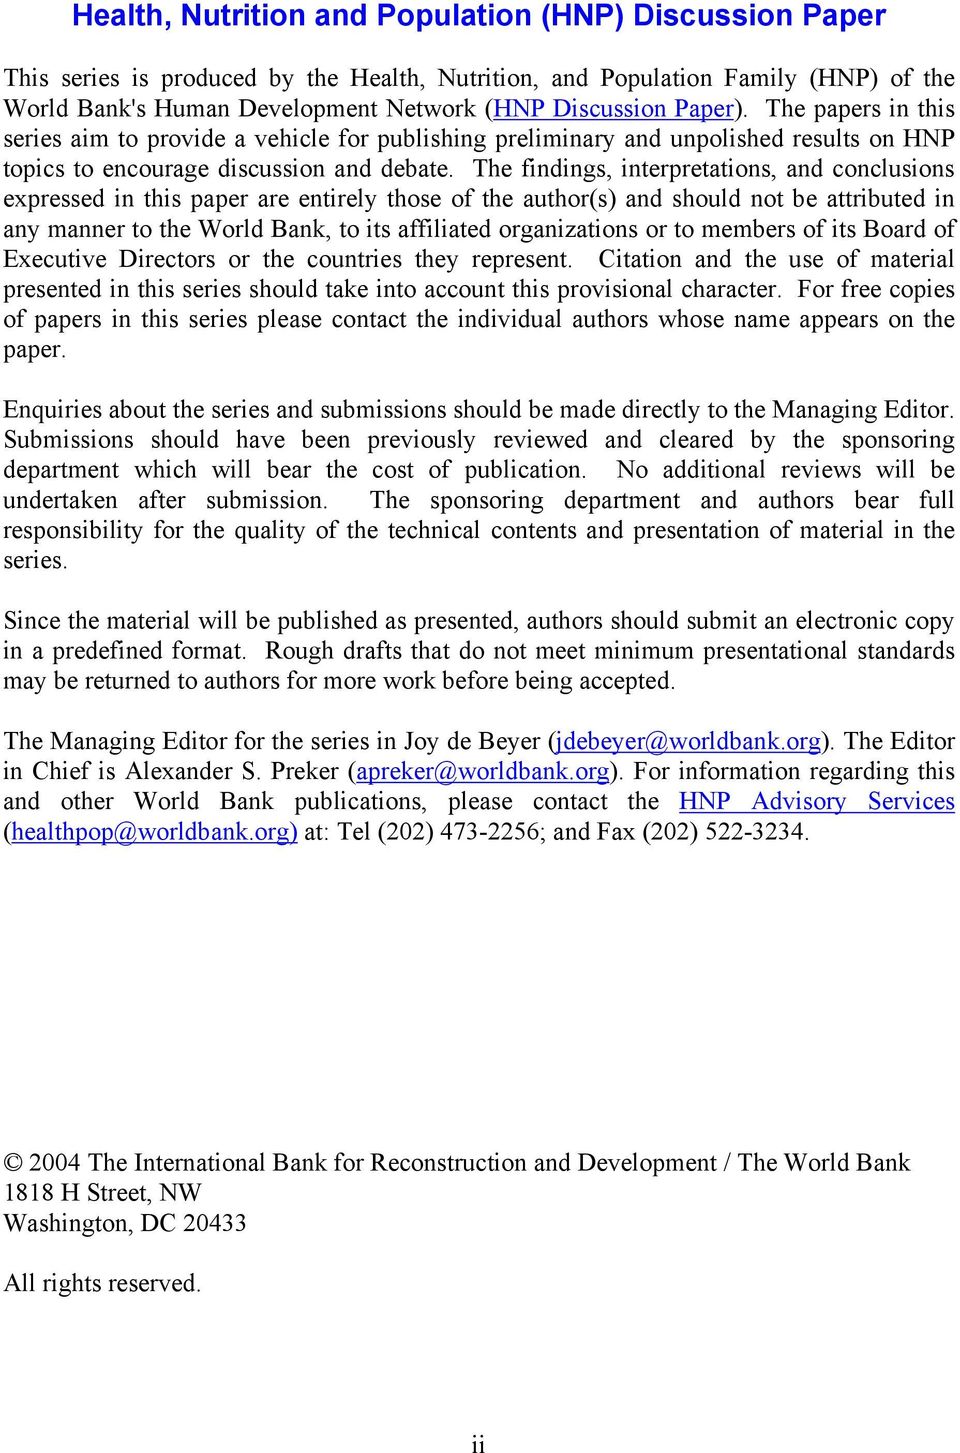 The findings, interpretations, and conclusions expressed in this paper are entirely those of the author(s) and should not be attributed in any manner to the World Bank, to its affiliated